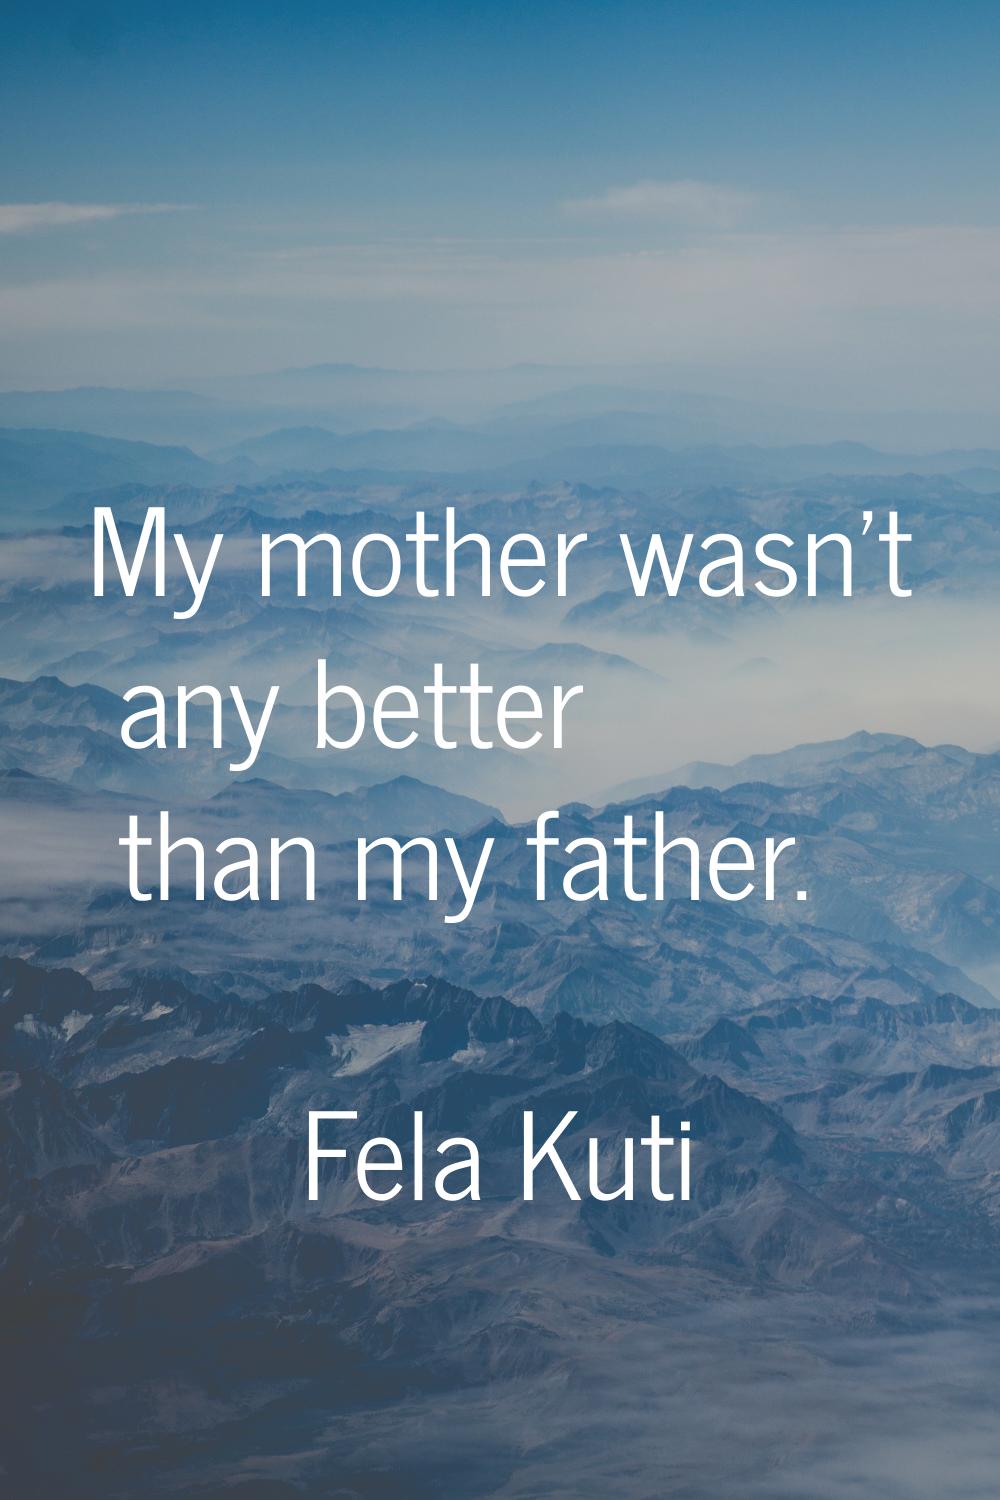 My mother wasn't any better than my father.